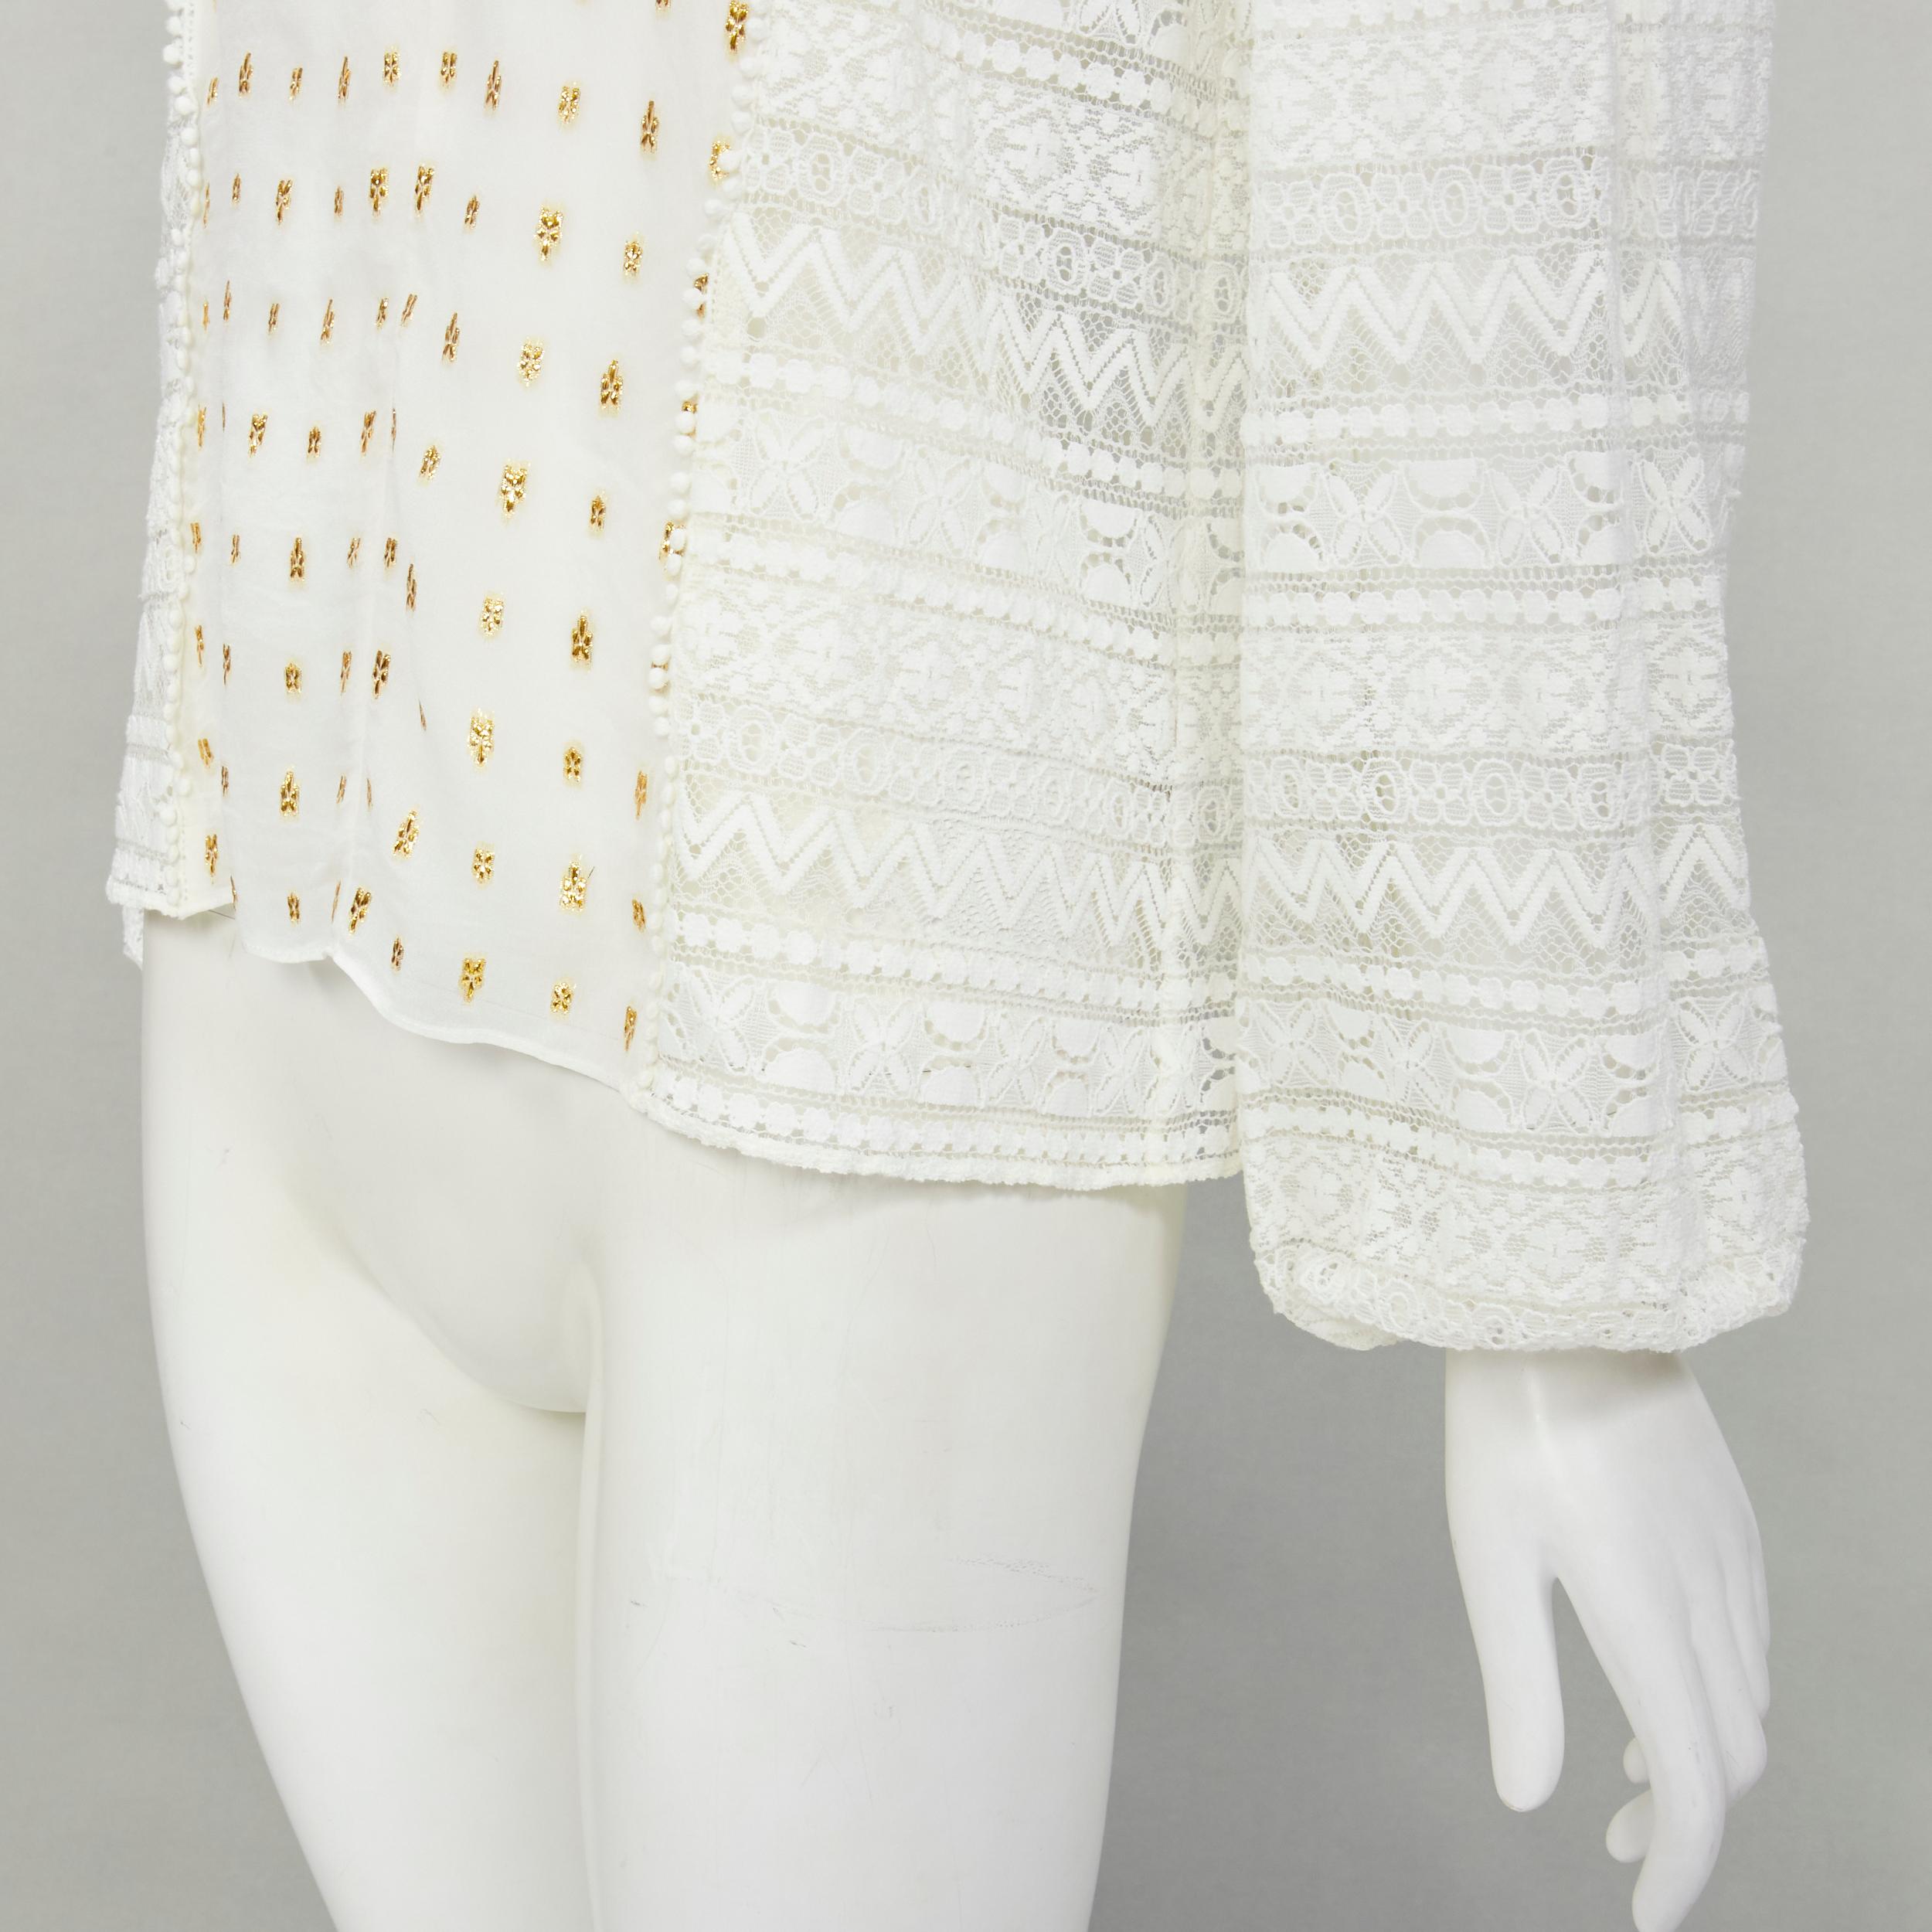 TEMPERLEY LONDON white sheer gold jacquard crochet lace bohemian top US4 S For Sale 3